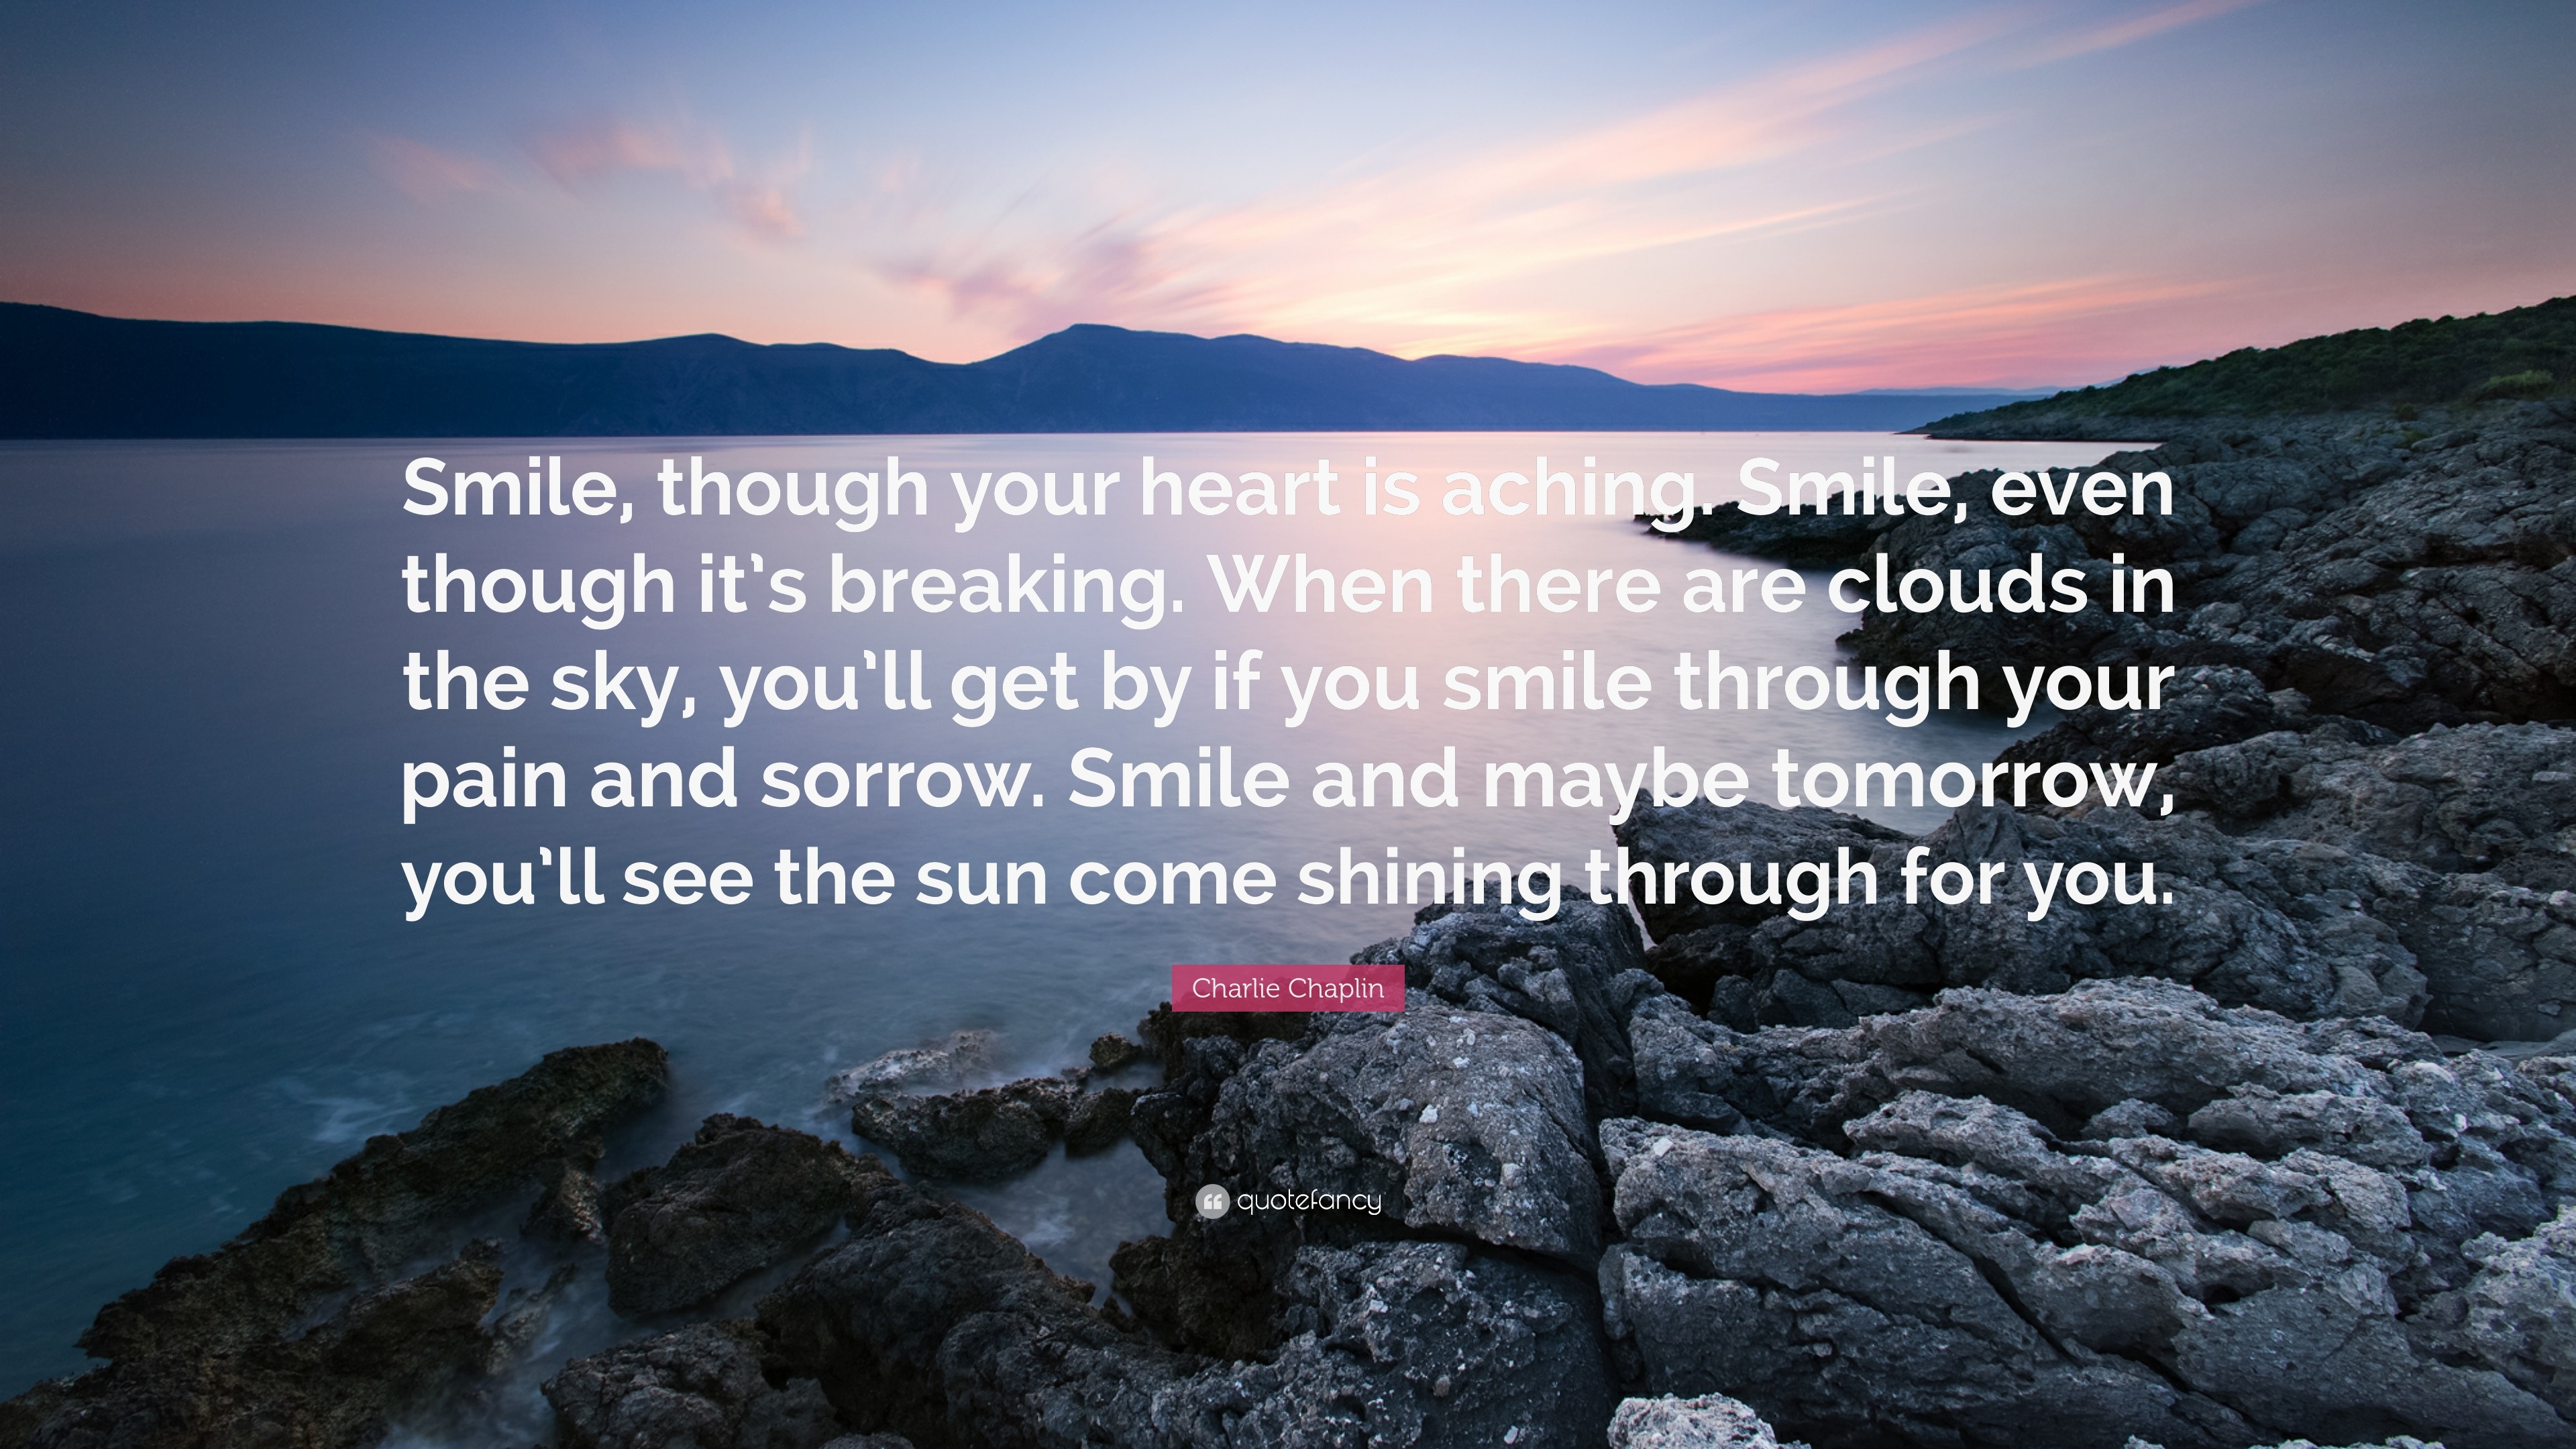 Charlie Chaplin Quote: “Smile, though your heart is aching. Smile, even ...